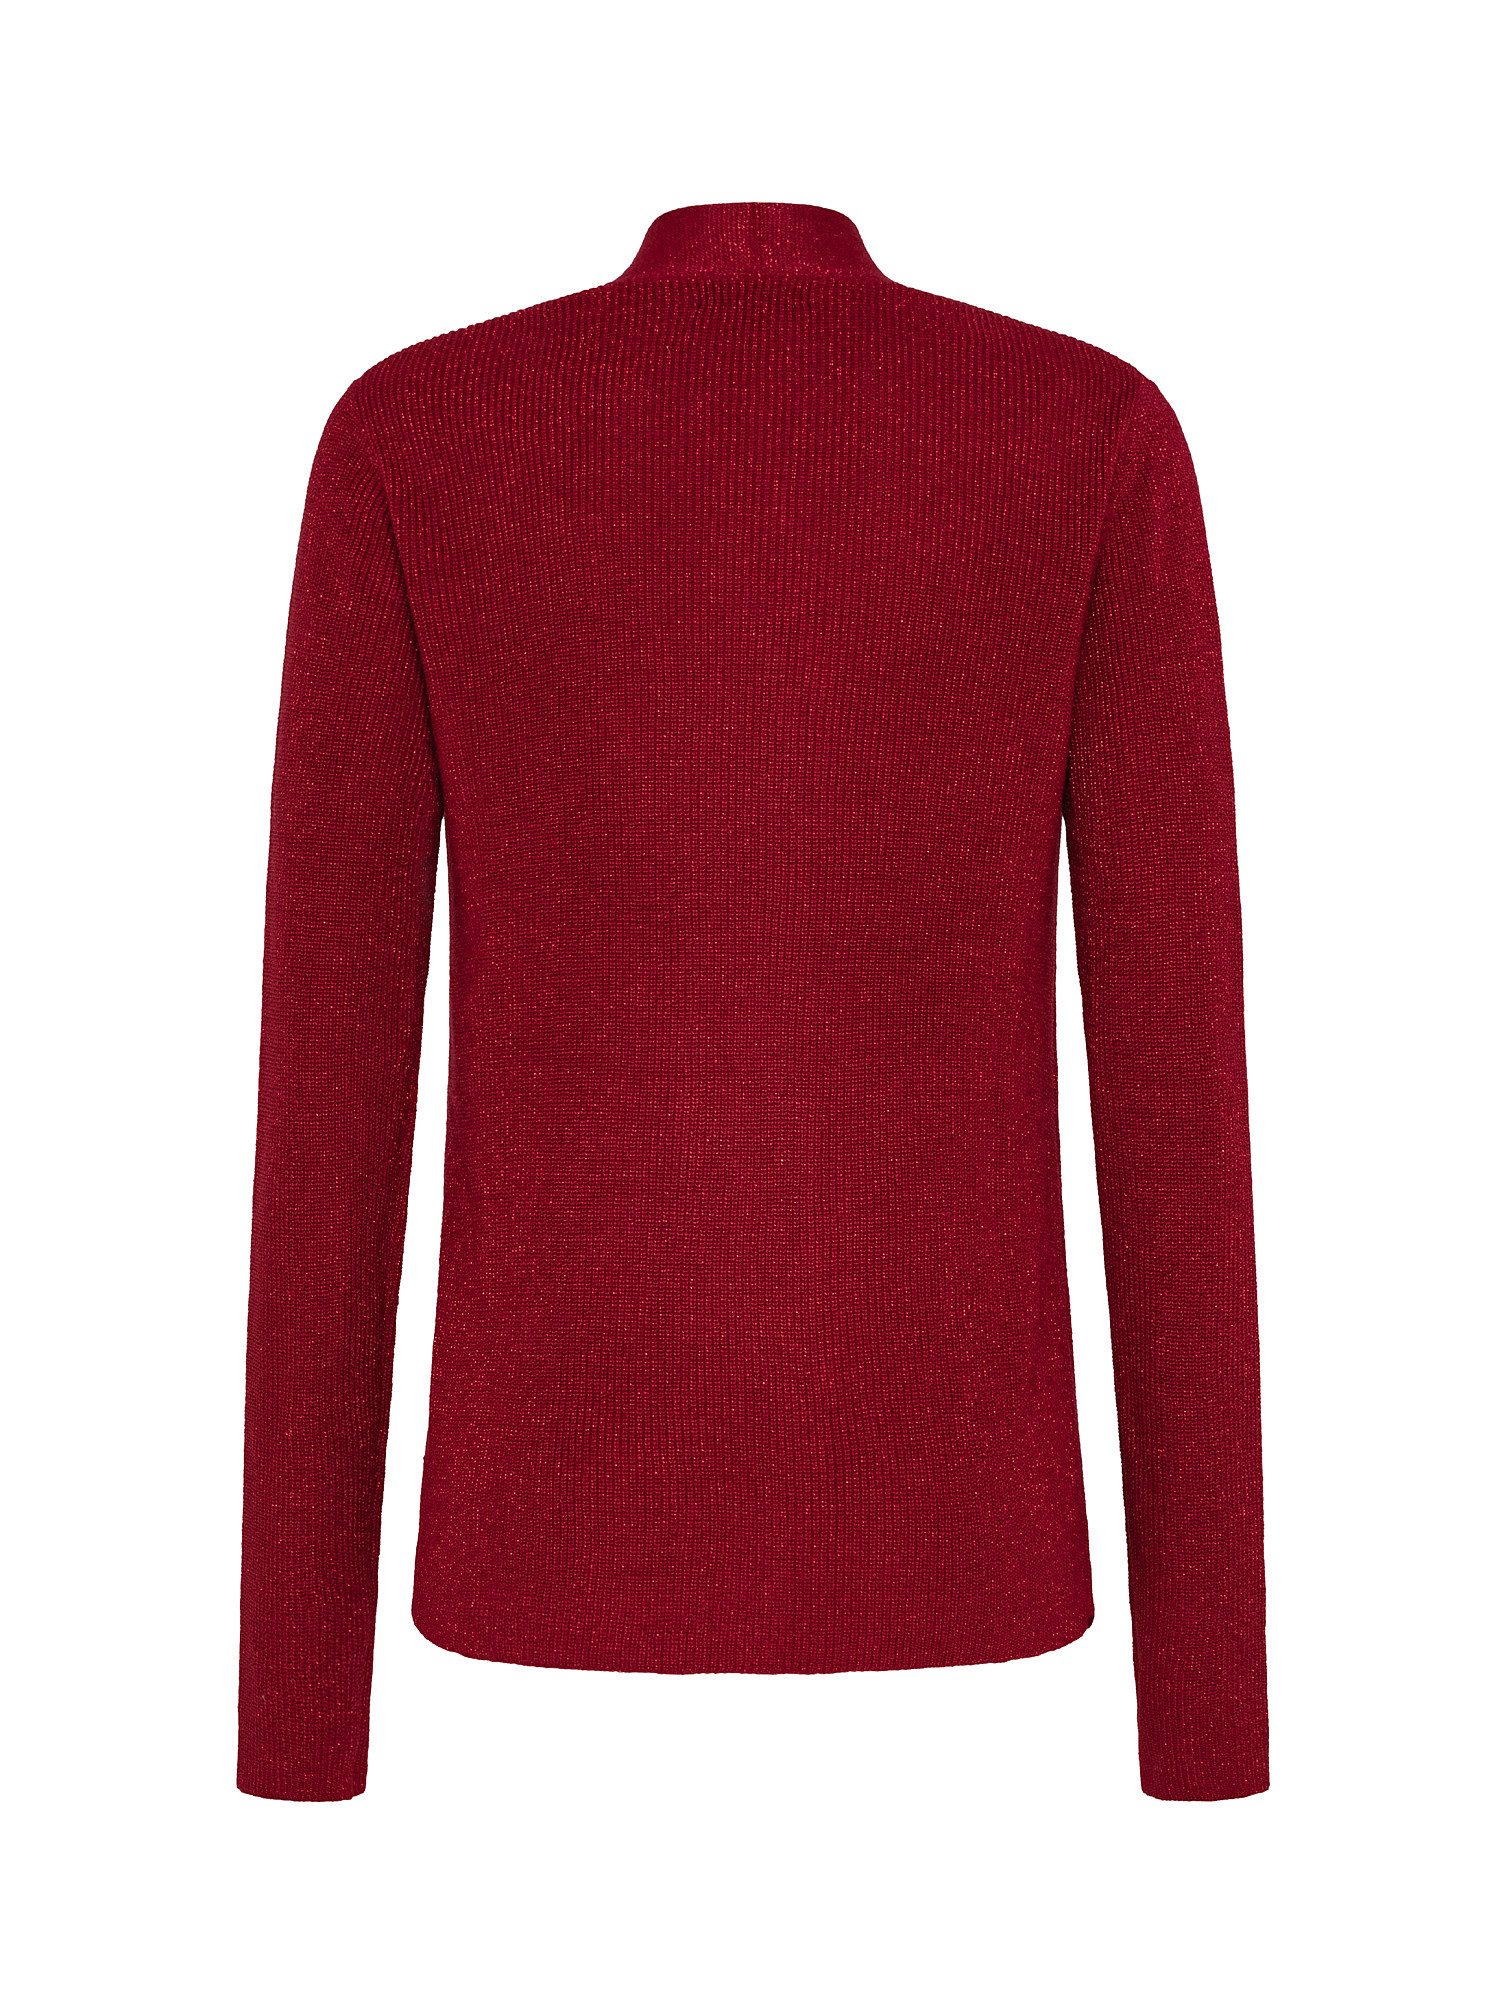 Cardigan in maglia, Rosso, large image number 1